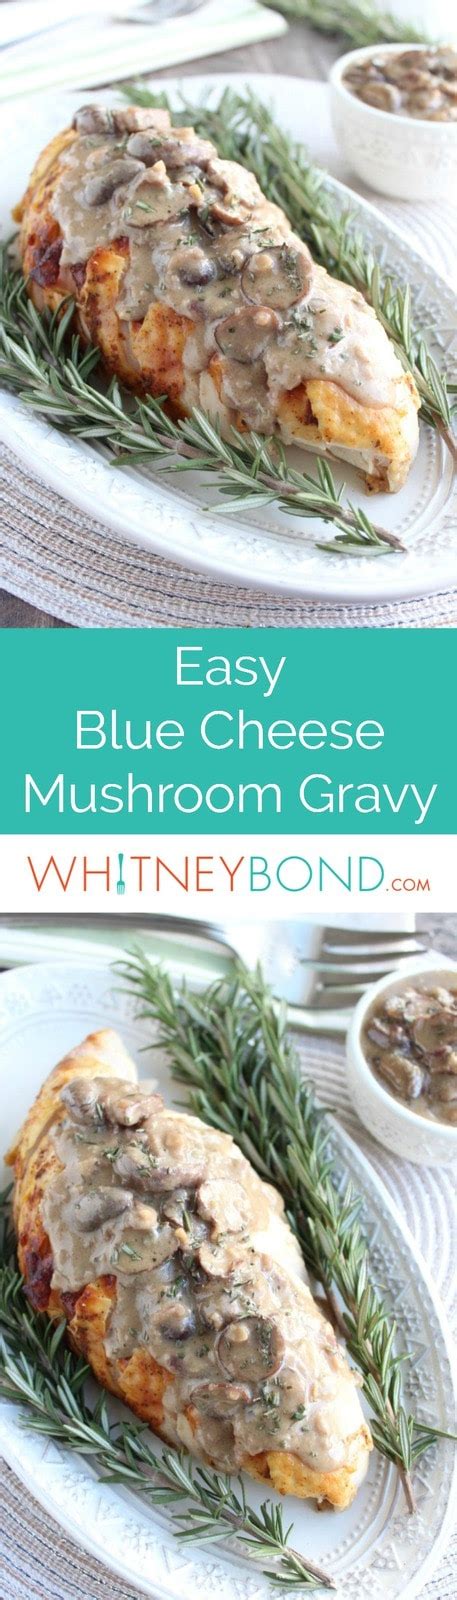 If you want to roast a turkey but have no idea where to begin, start by brining the bird. Roasted Turkey Breast with Blue Cheese Mushroom Gravy